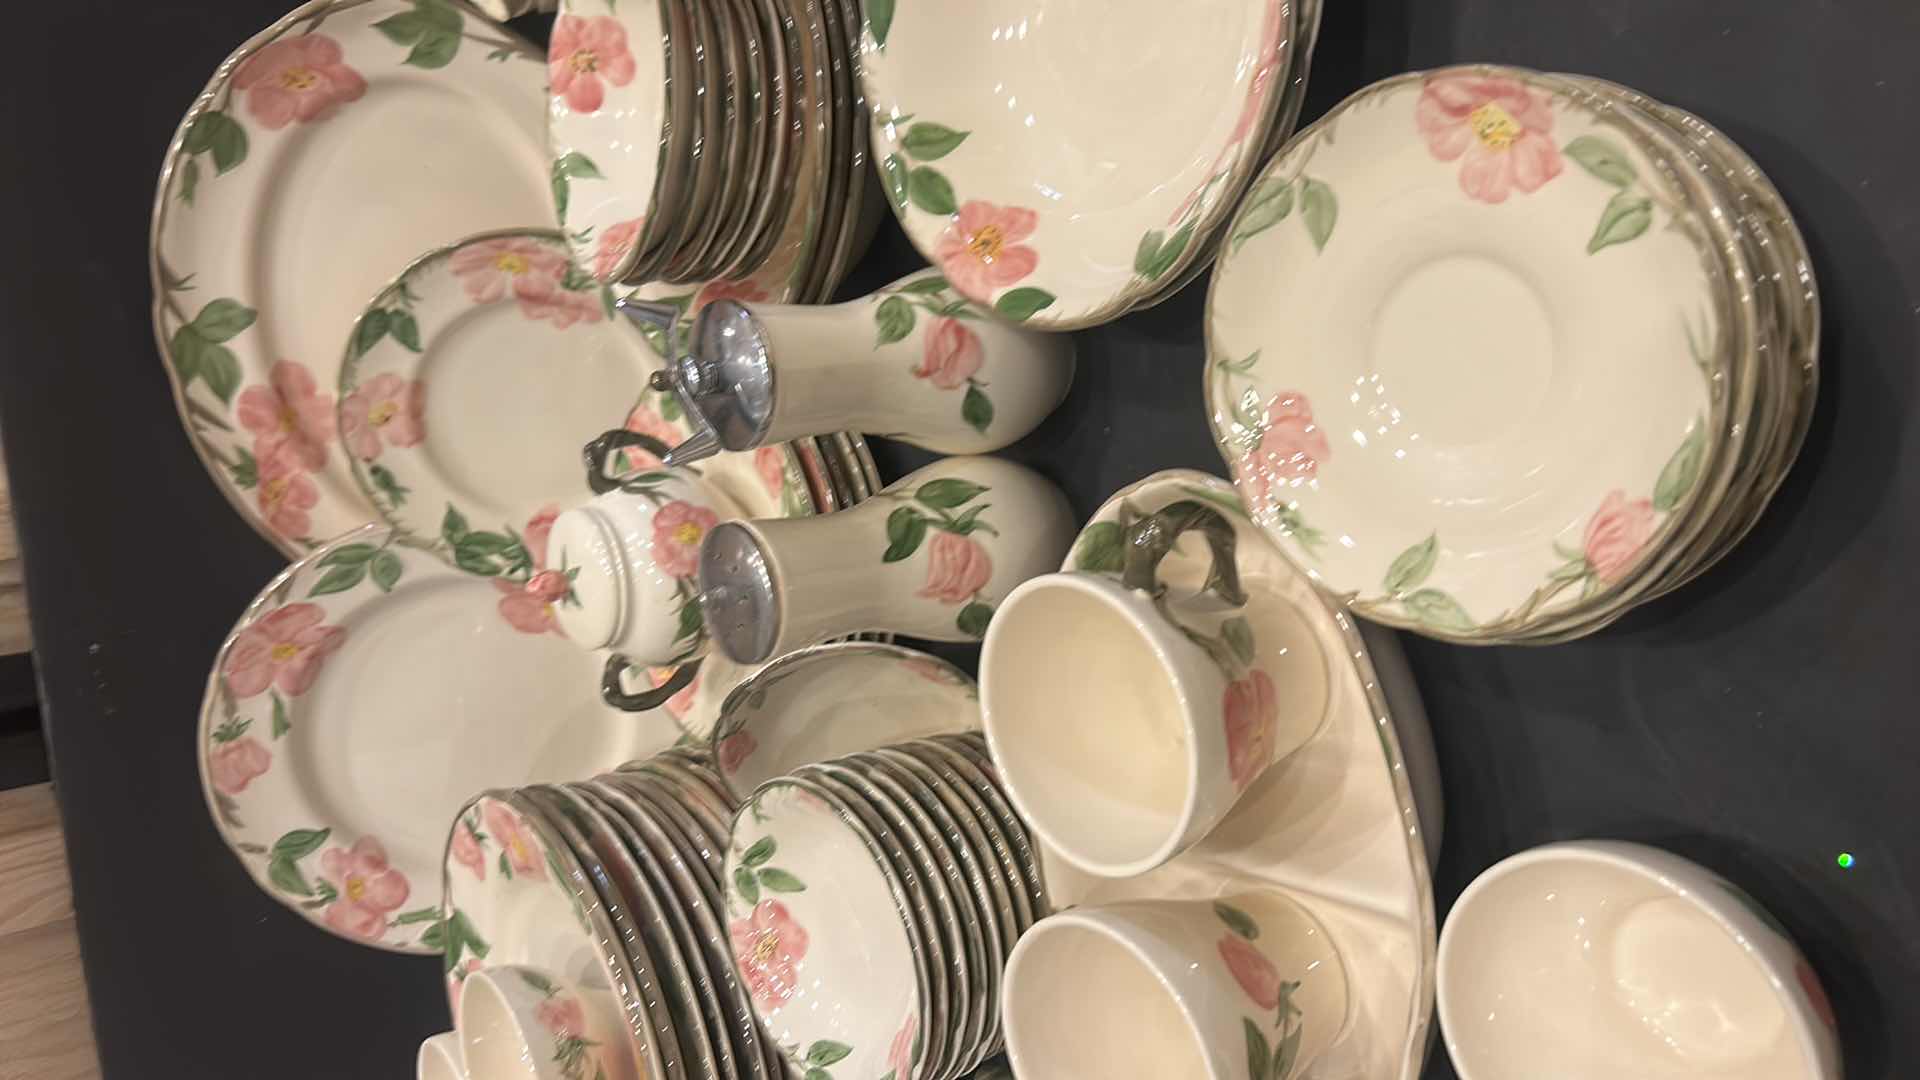 Photo 3 of 85 PIECE FRANCISCAN DESERT ROSE COLLECTION - BEAUTIFUL IVORY AND PINK FLORAL DINNERWARE SET in